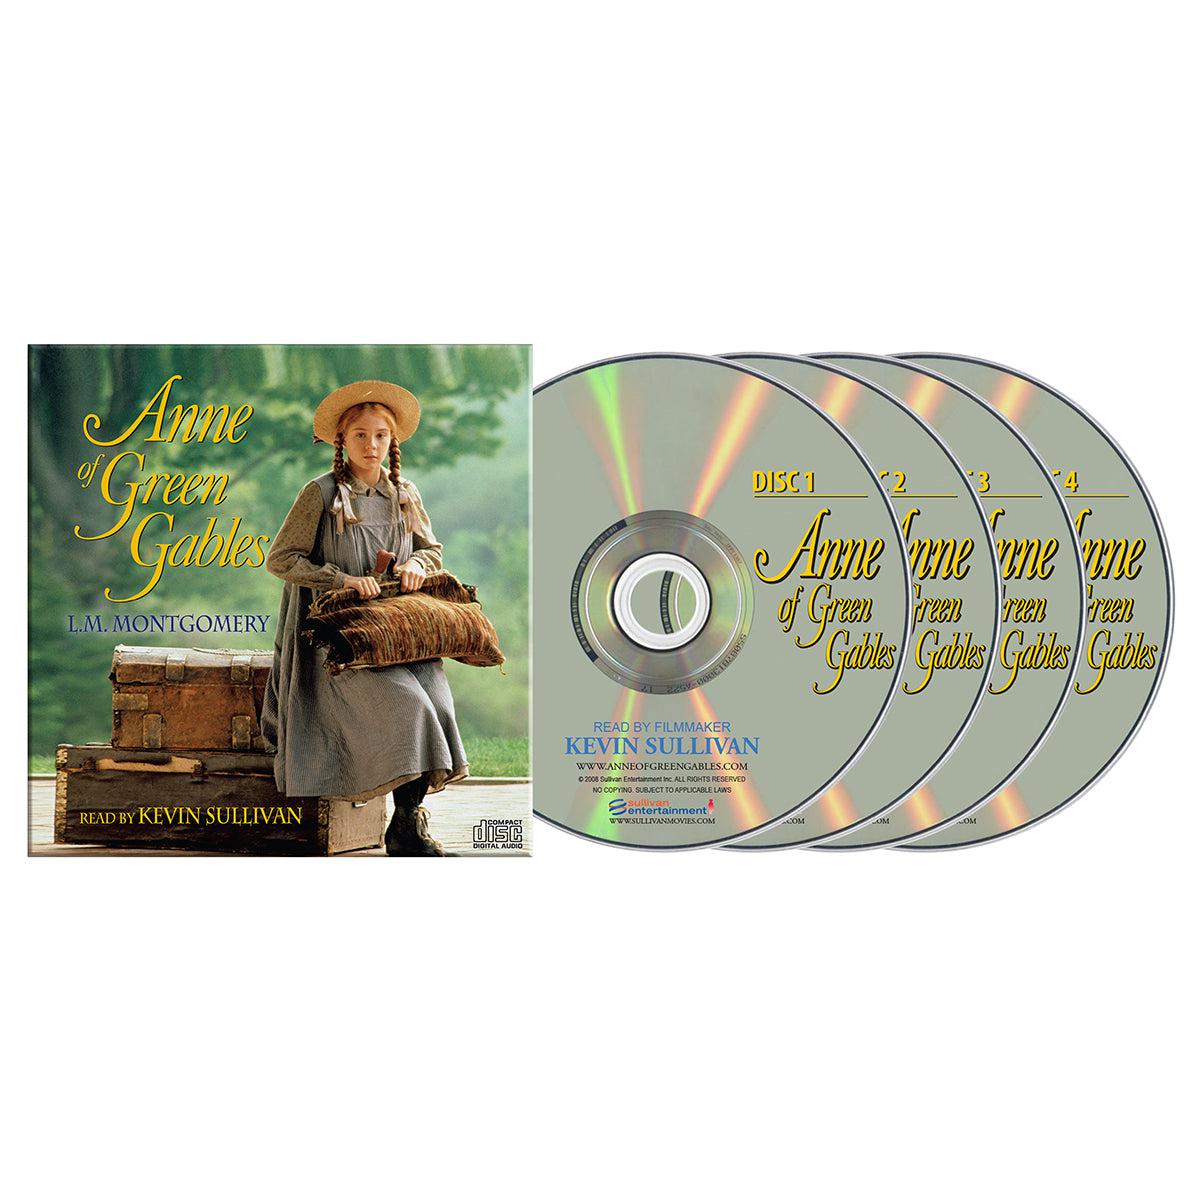 Anne of Green Gables Blu-ray Ultimate Collector's Box Set